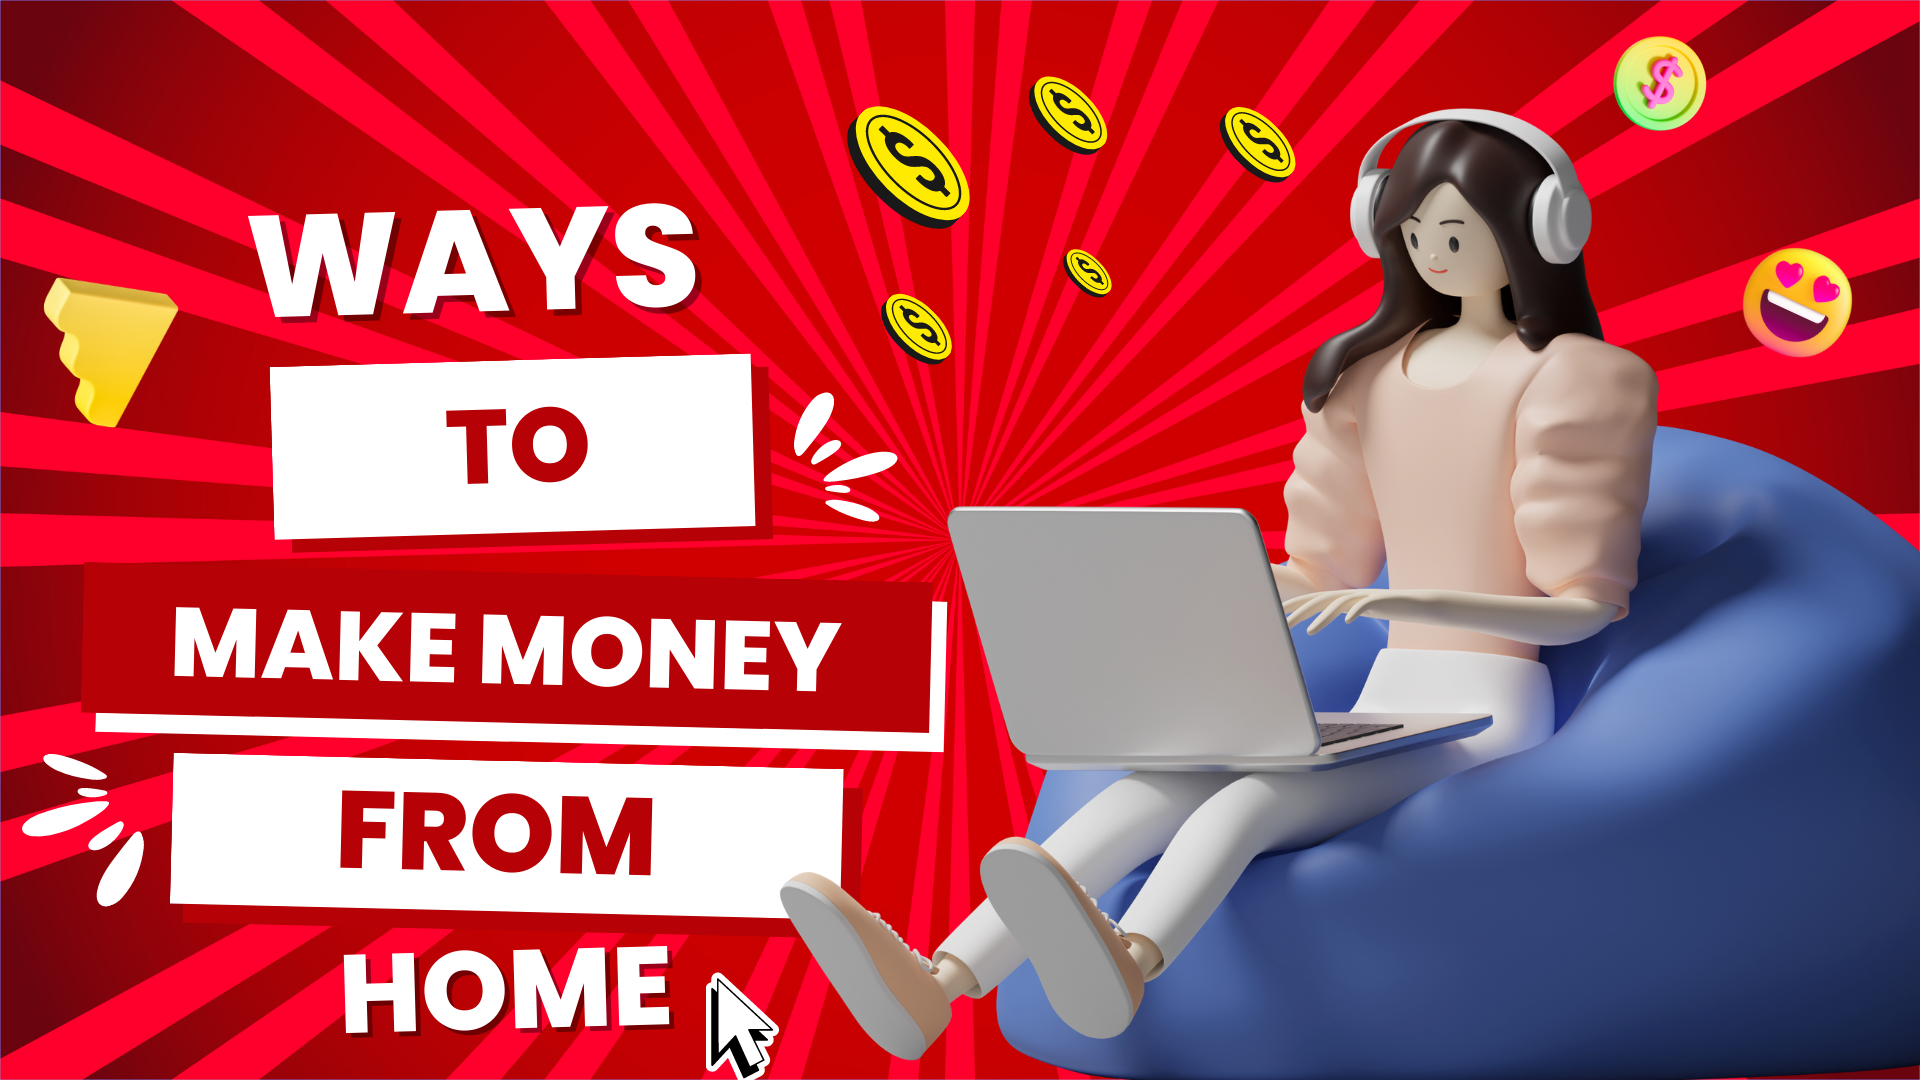 Ways to Make Money from Home 